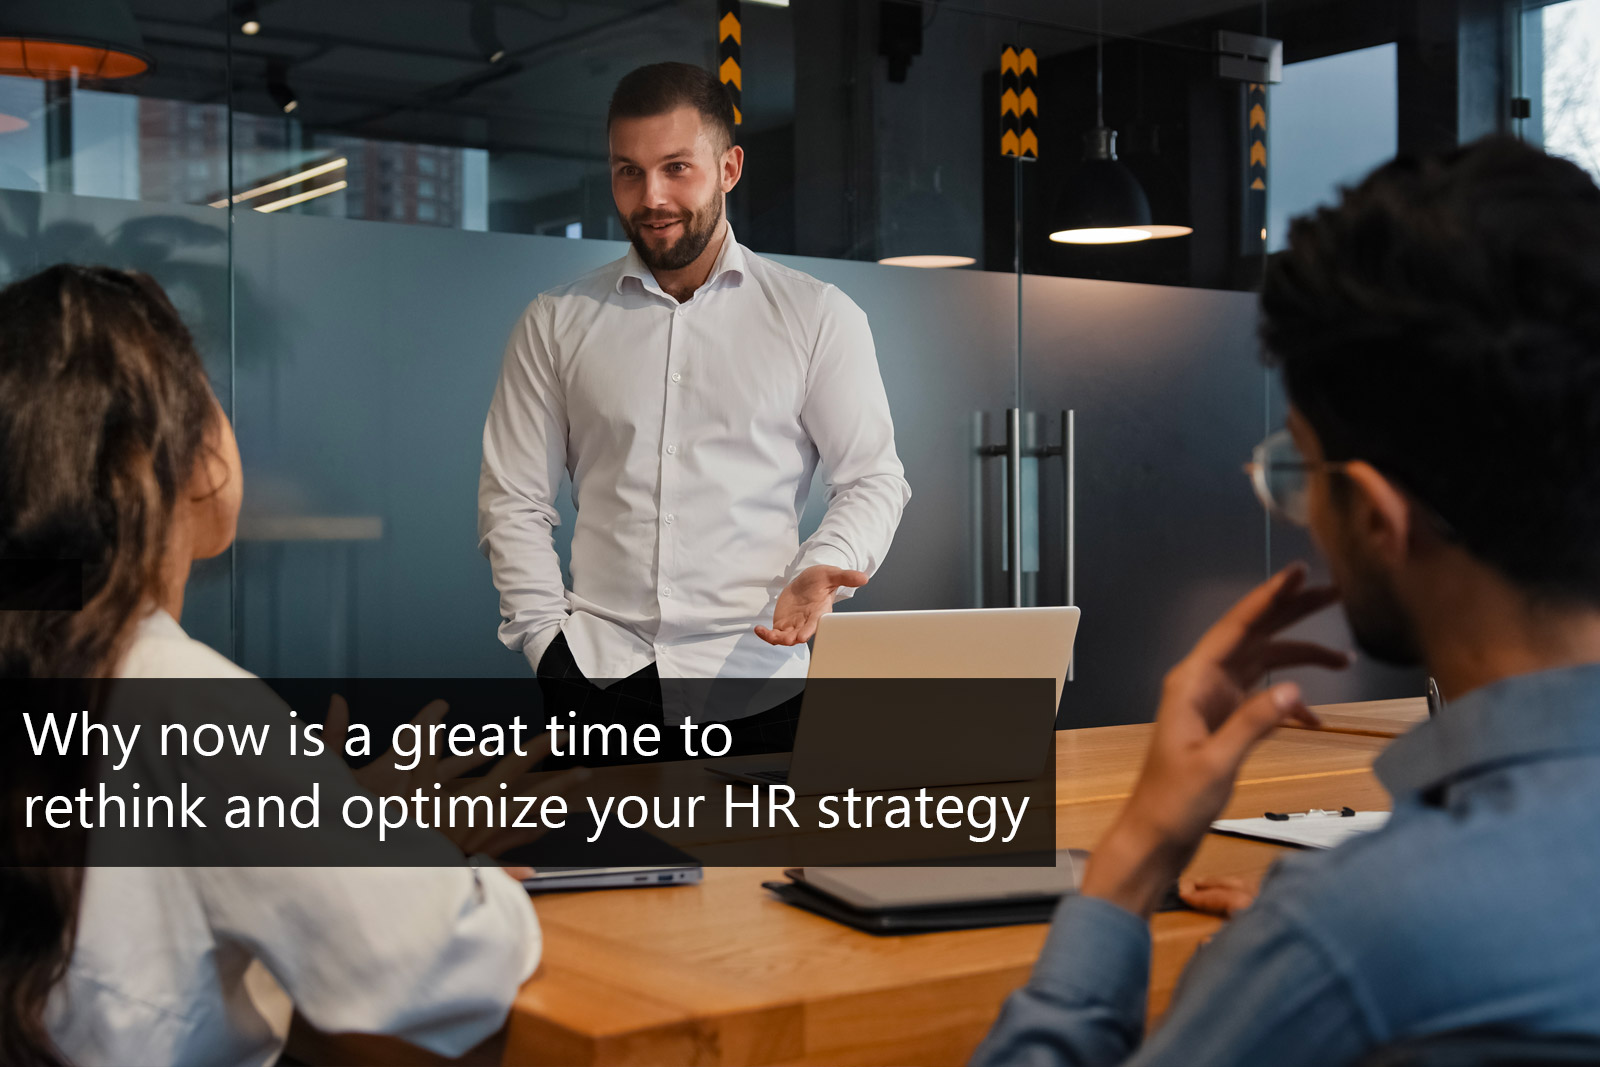 Why now is a great time to rethink and optimize your HR strategy